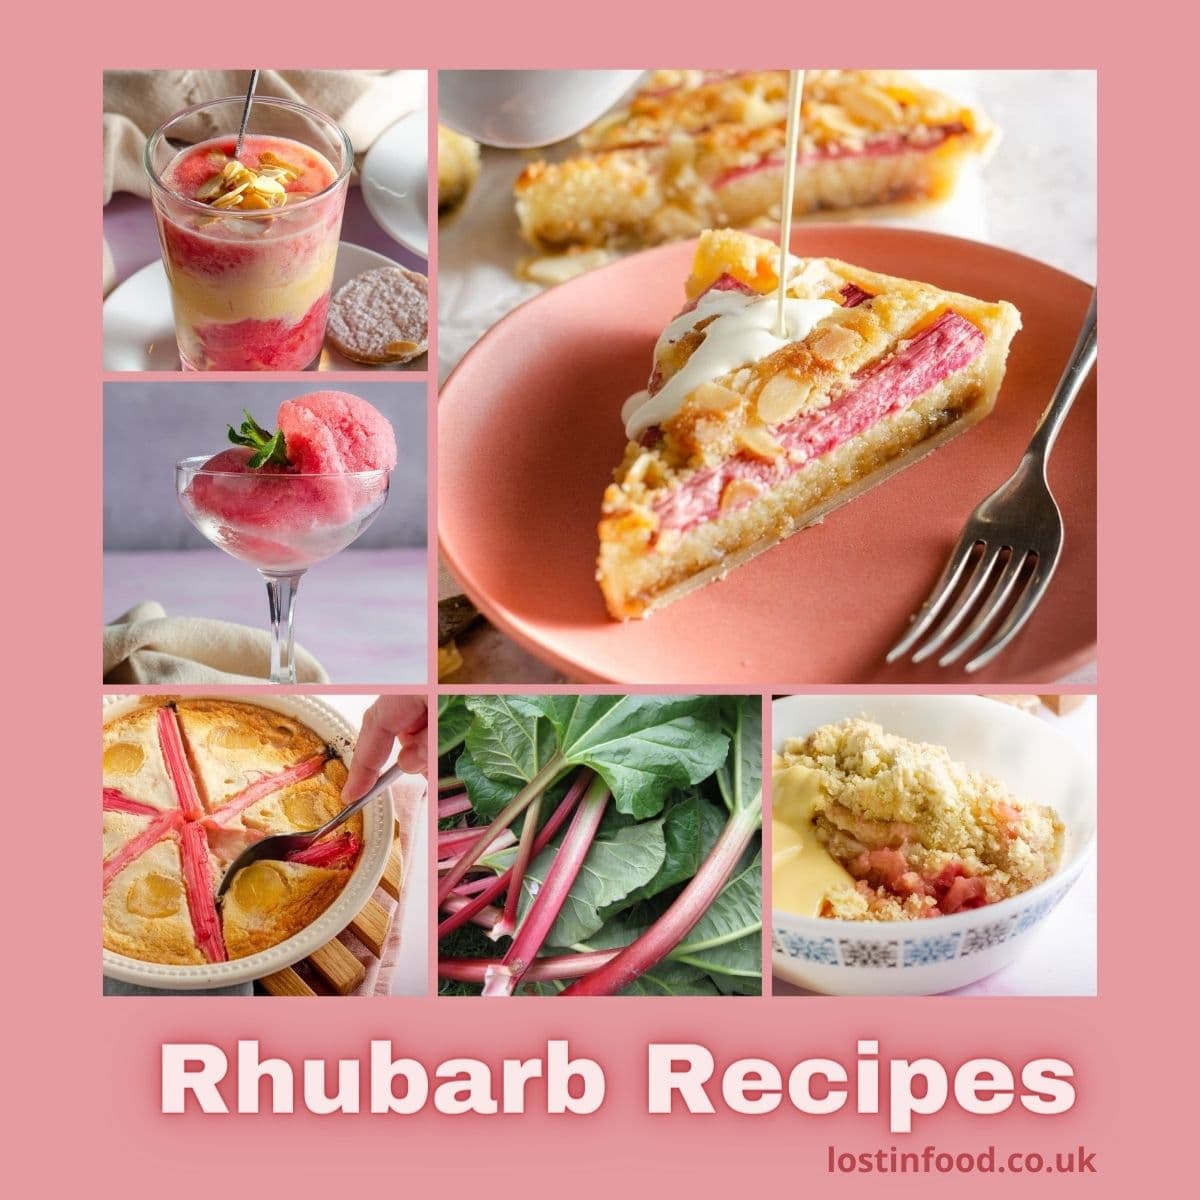 A collage image of rhubarb recipes from Lost in Food.